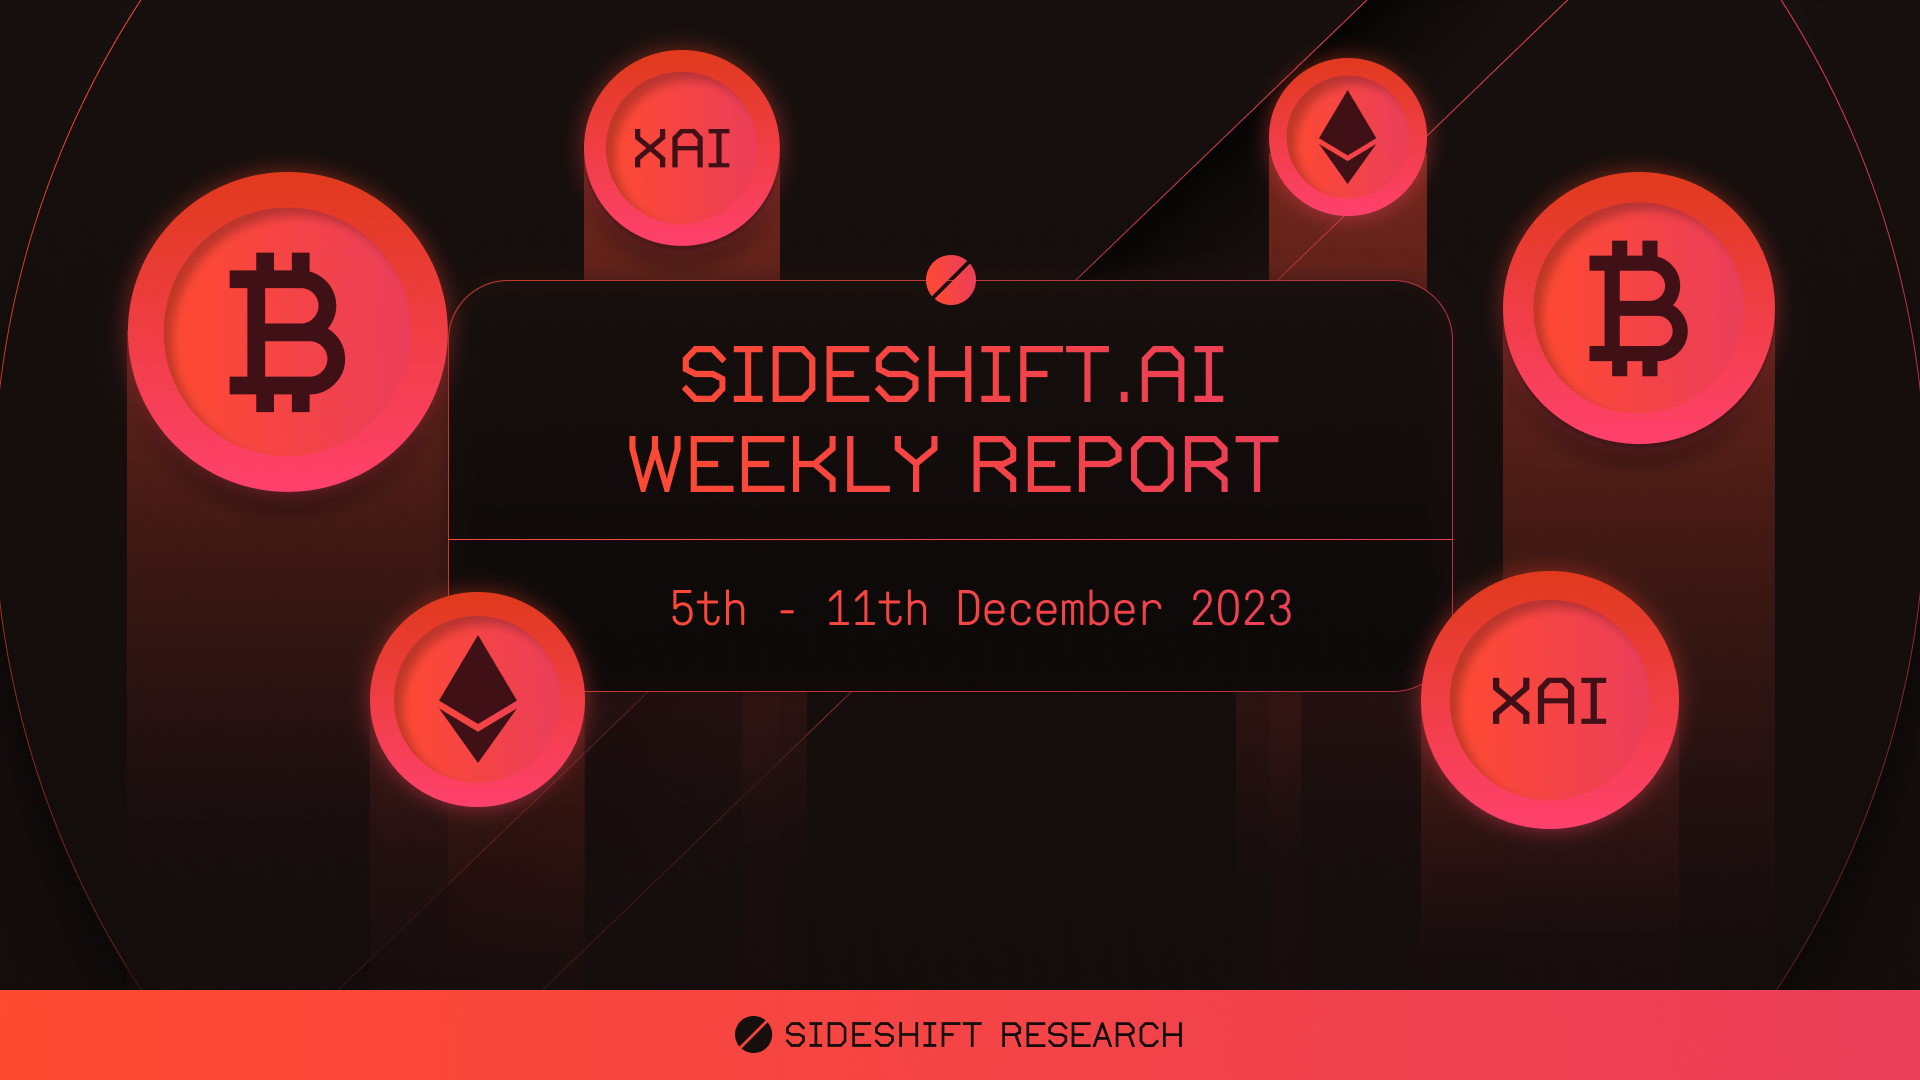 SideShift.ai Weekly Report | 5th - 11th December 2023